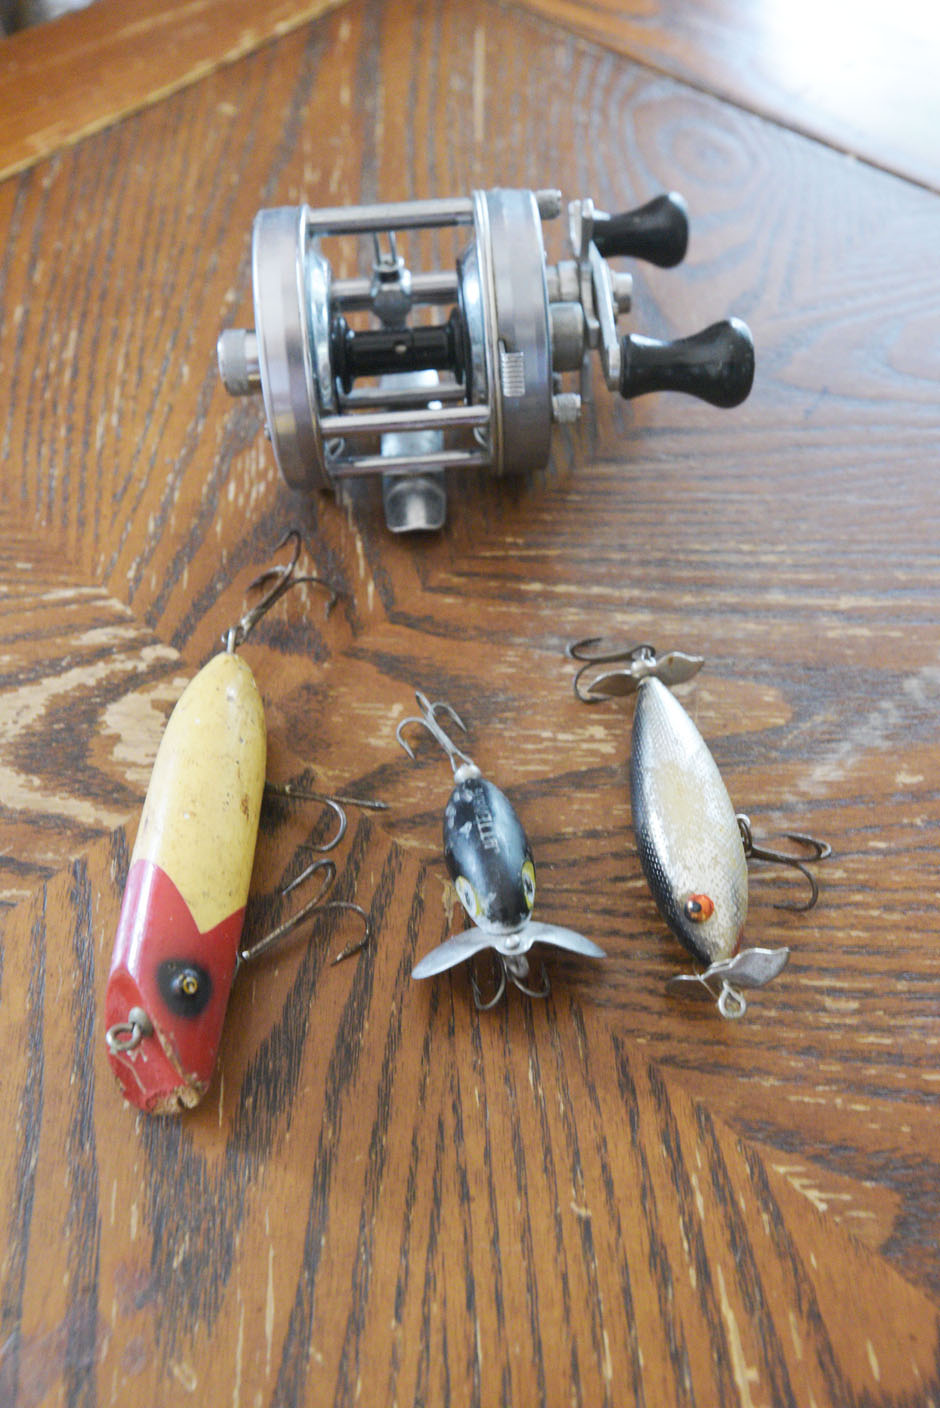 Sell Your Lures Here! I Buy Old, Antique, And Vintage Fishing